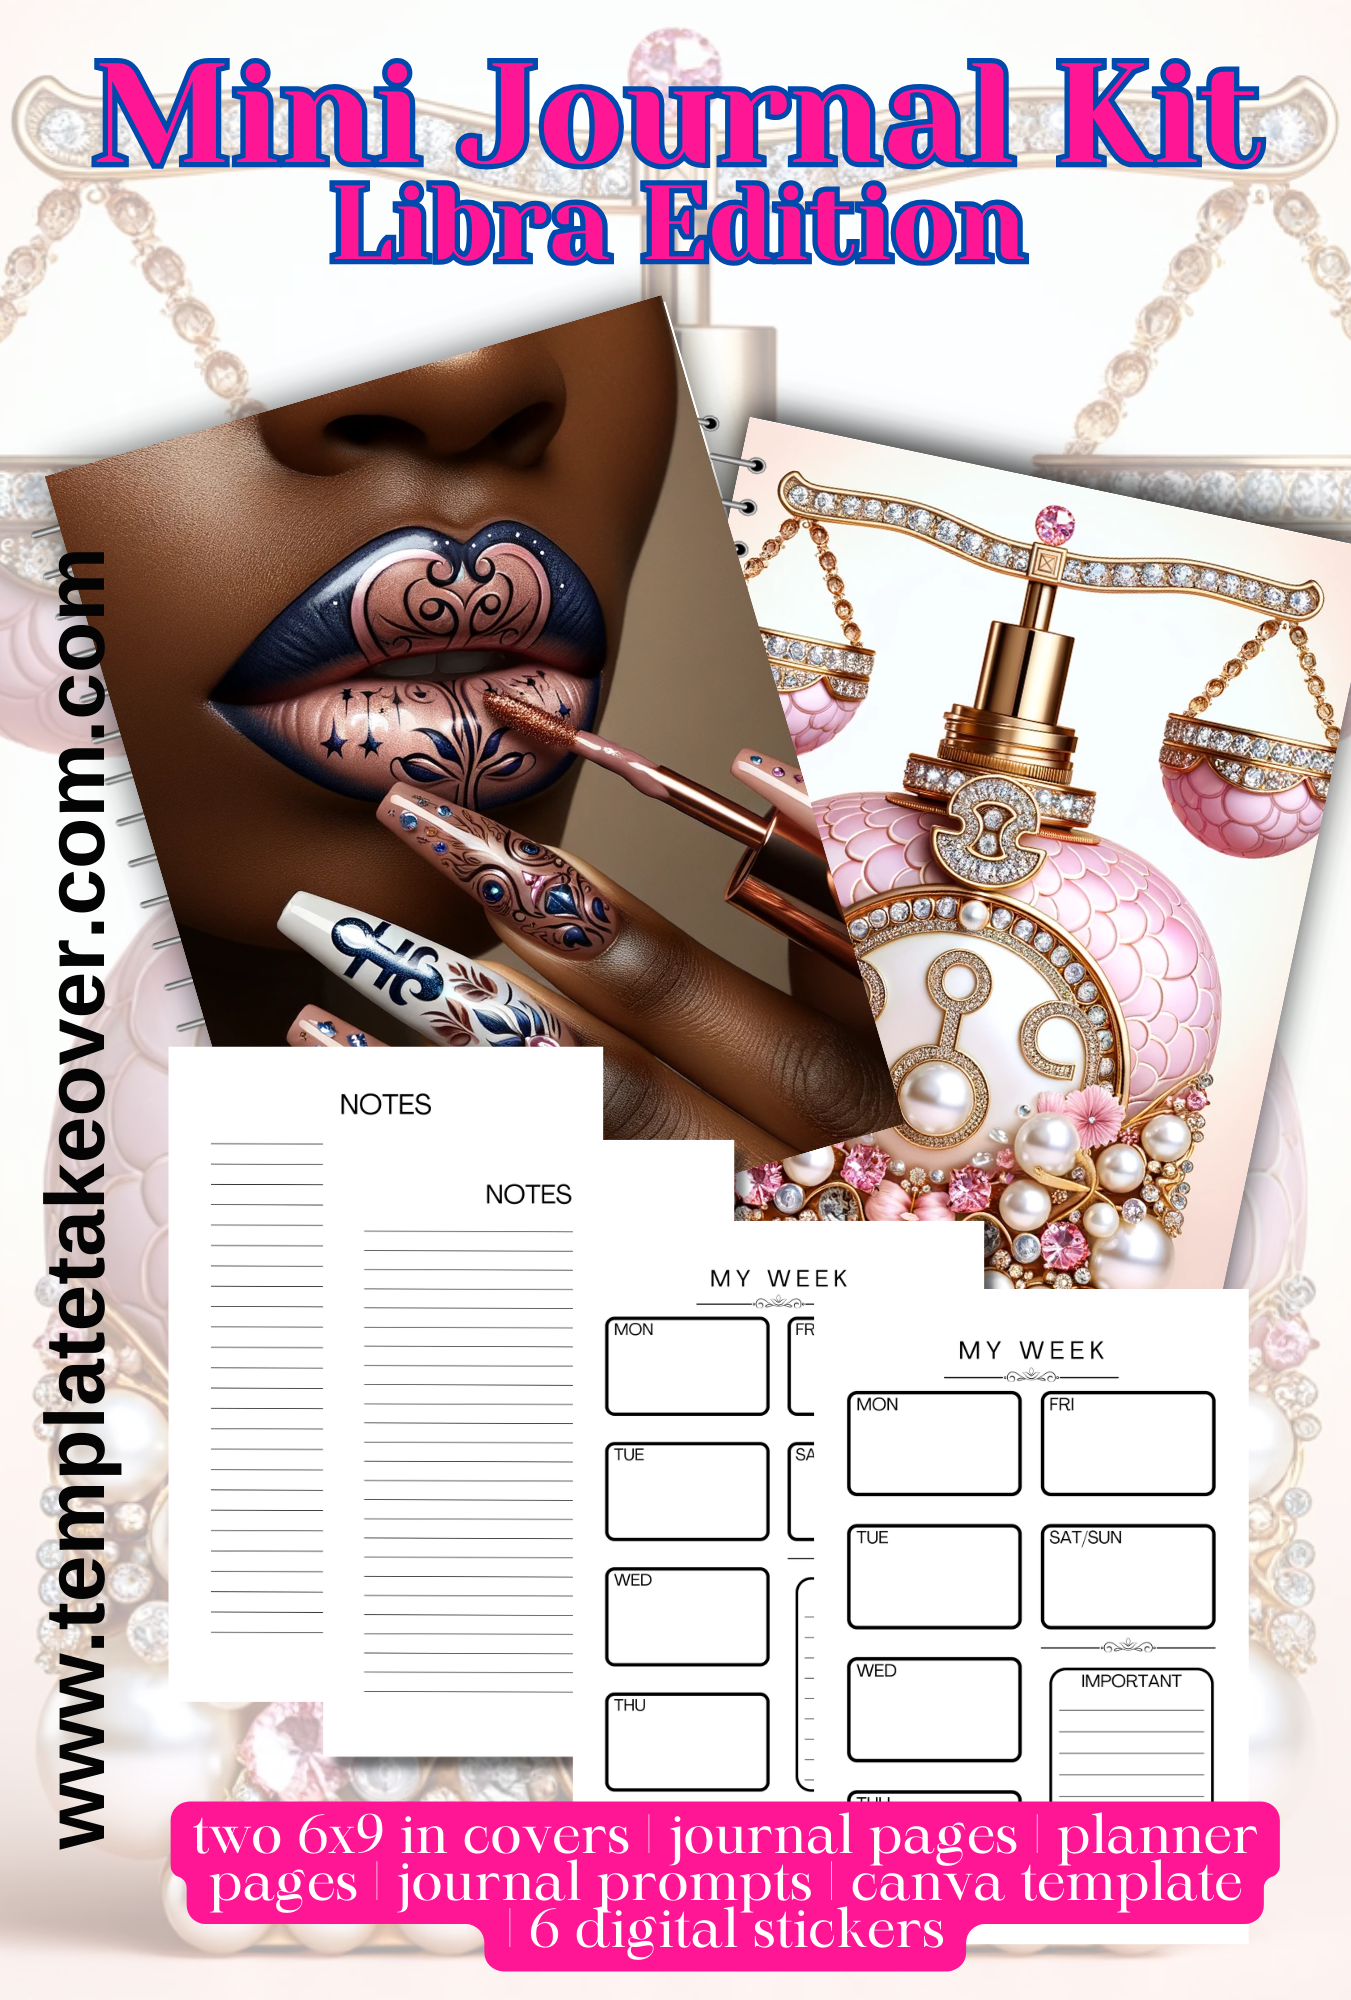 Celestial Scents: Libra Edition Journal: Perfect for Crafters, Creatives, Coaches, and More - Set of 2 Covers, 15 Journal Pages, 5 Planner Pages, 15 Prompts and 6 Digital Stickers. Volume 3